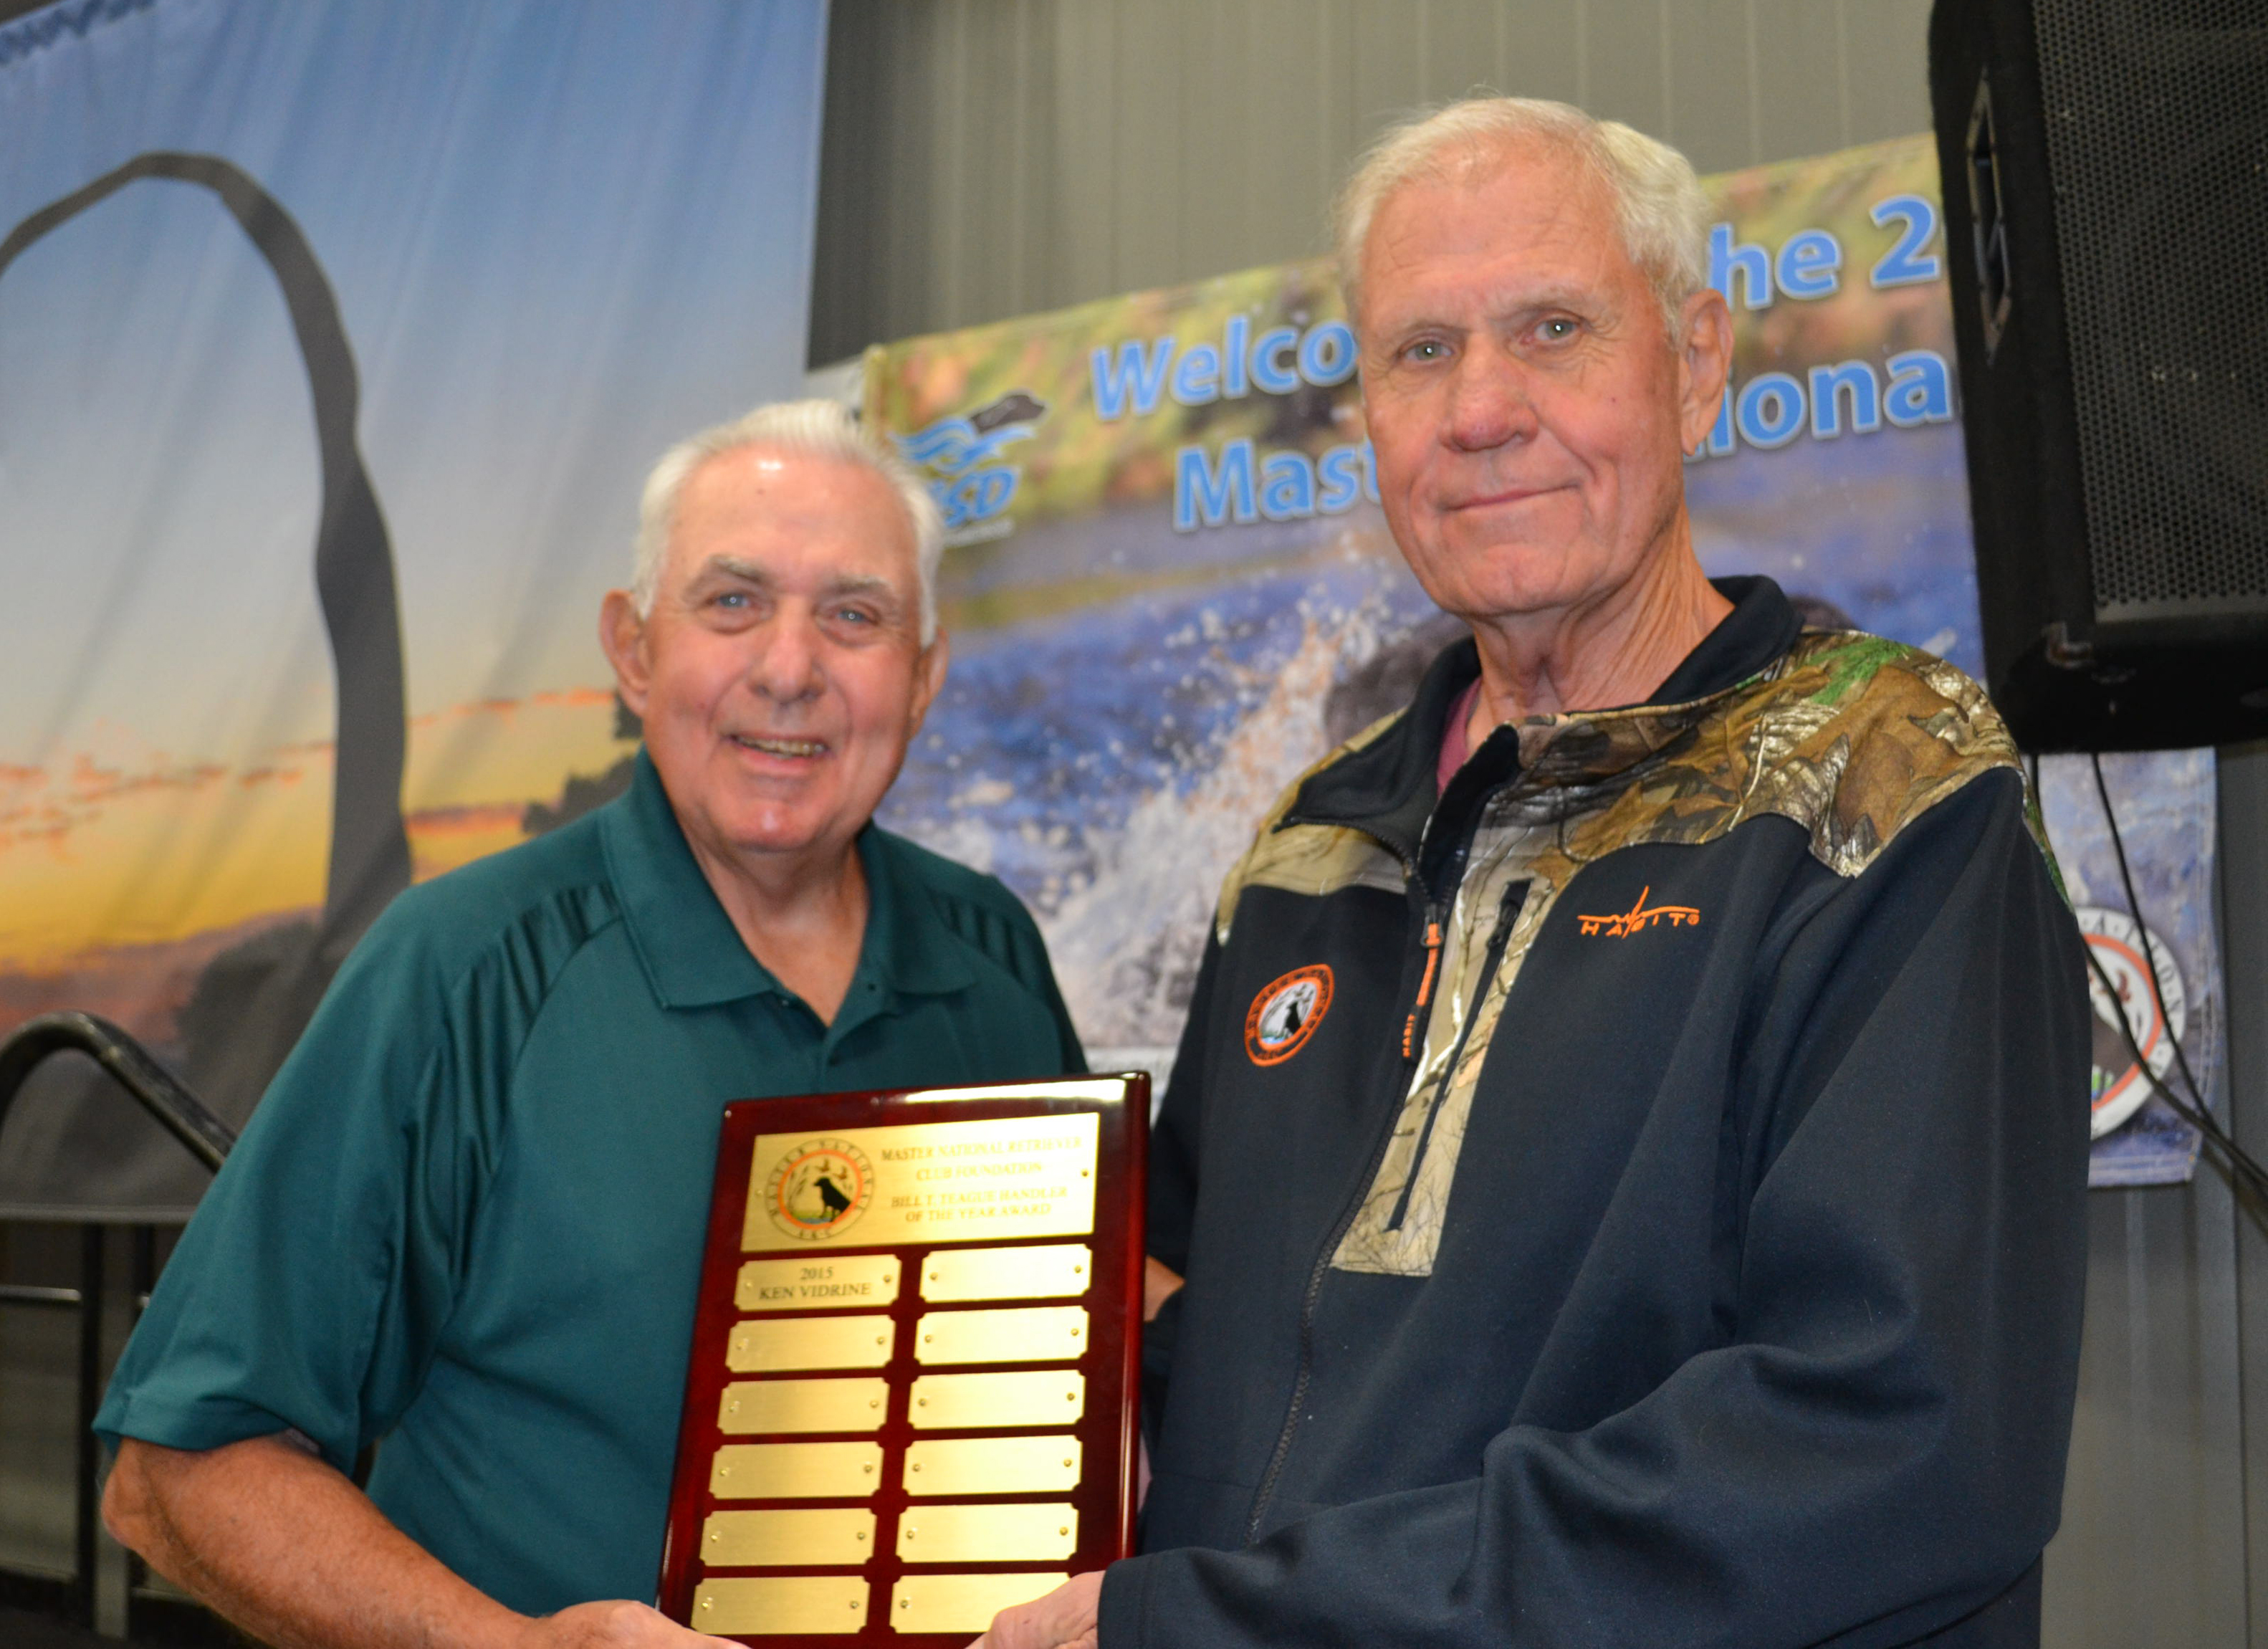 The first “Handler of the Year” Award was presented to Ken Vidrine .